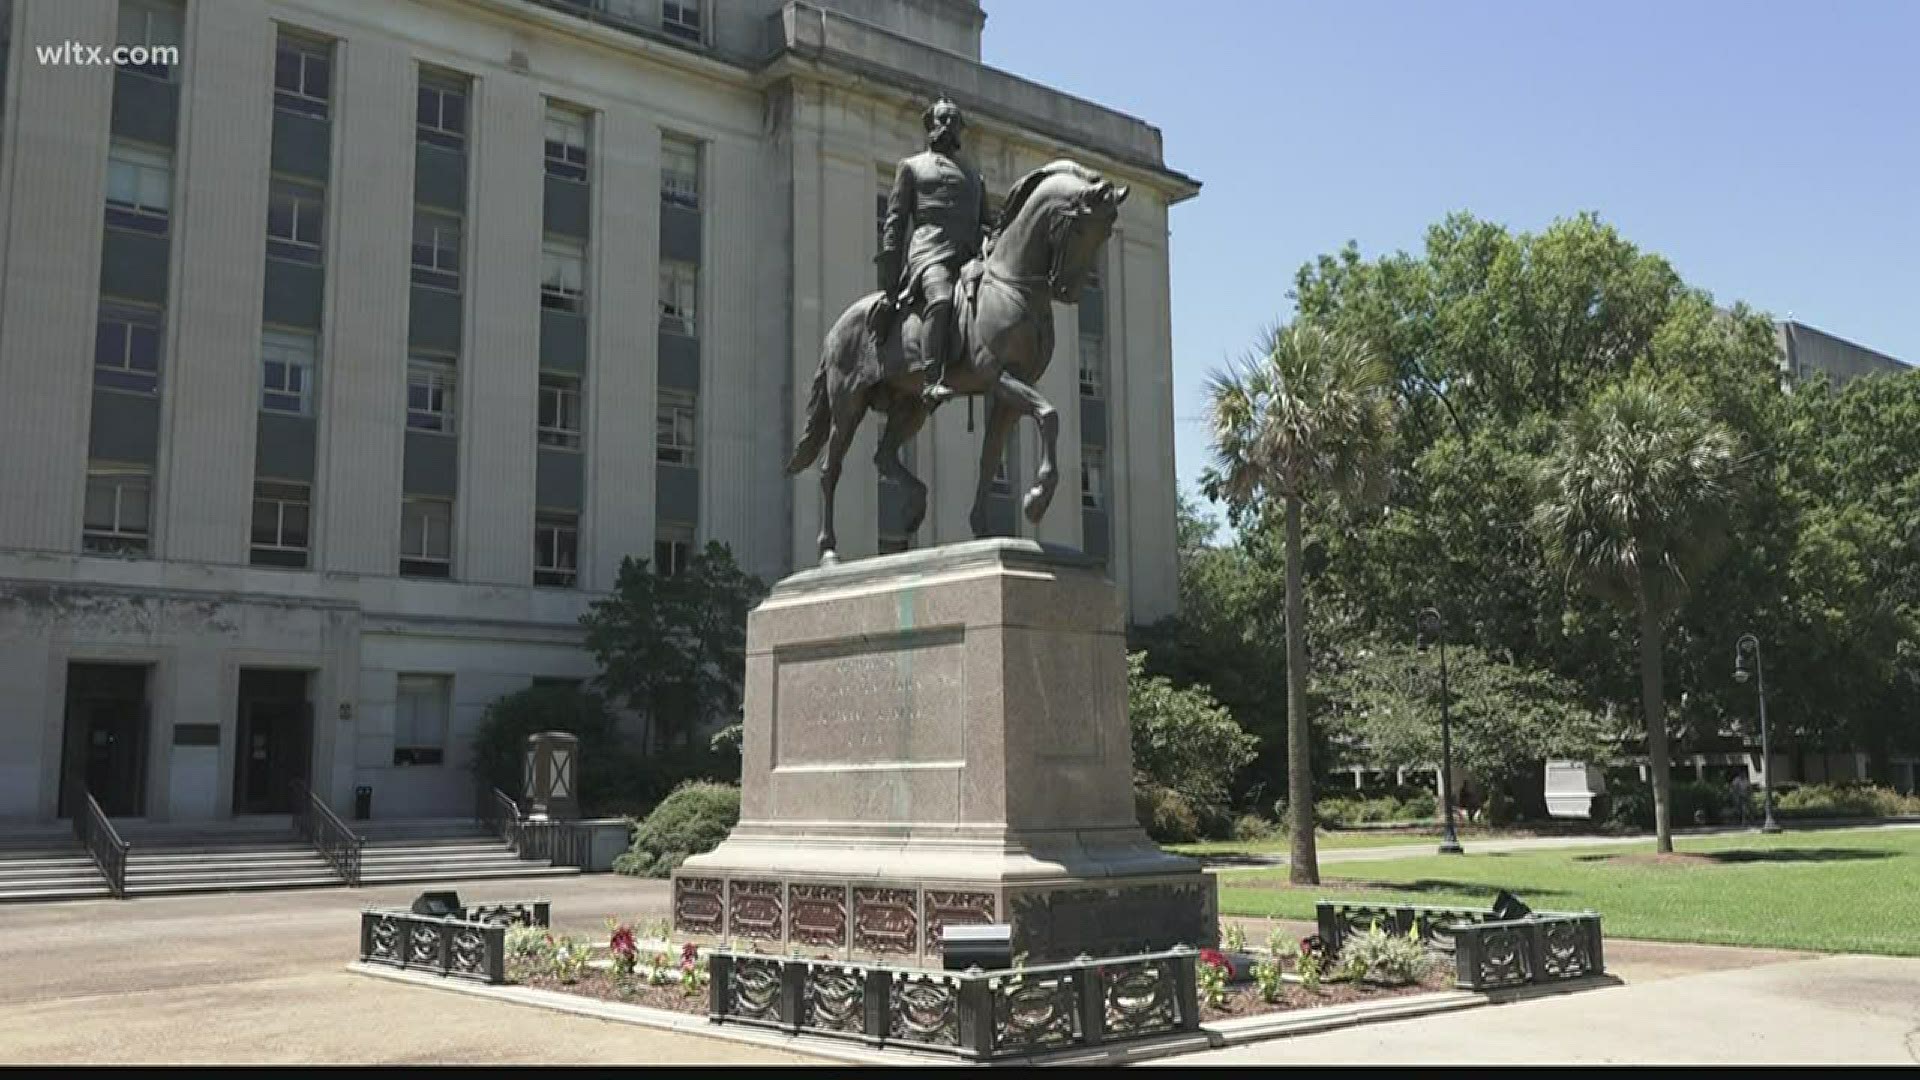 The South Carolina Heritage Act requires a two-third majority of the state legislature to approve the removal of a Confederate monument.